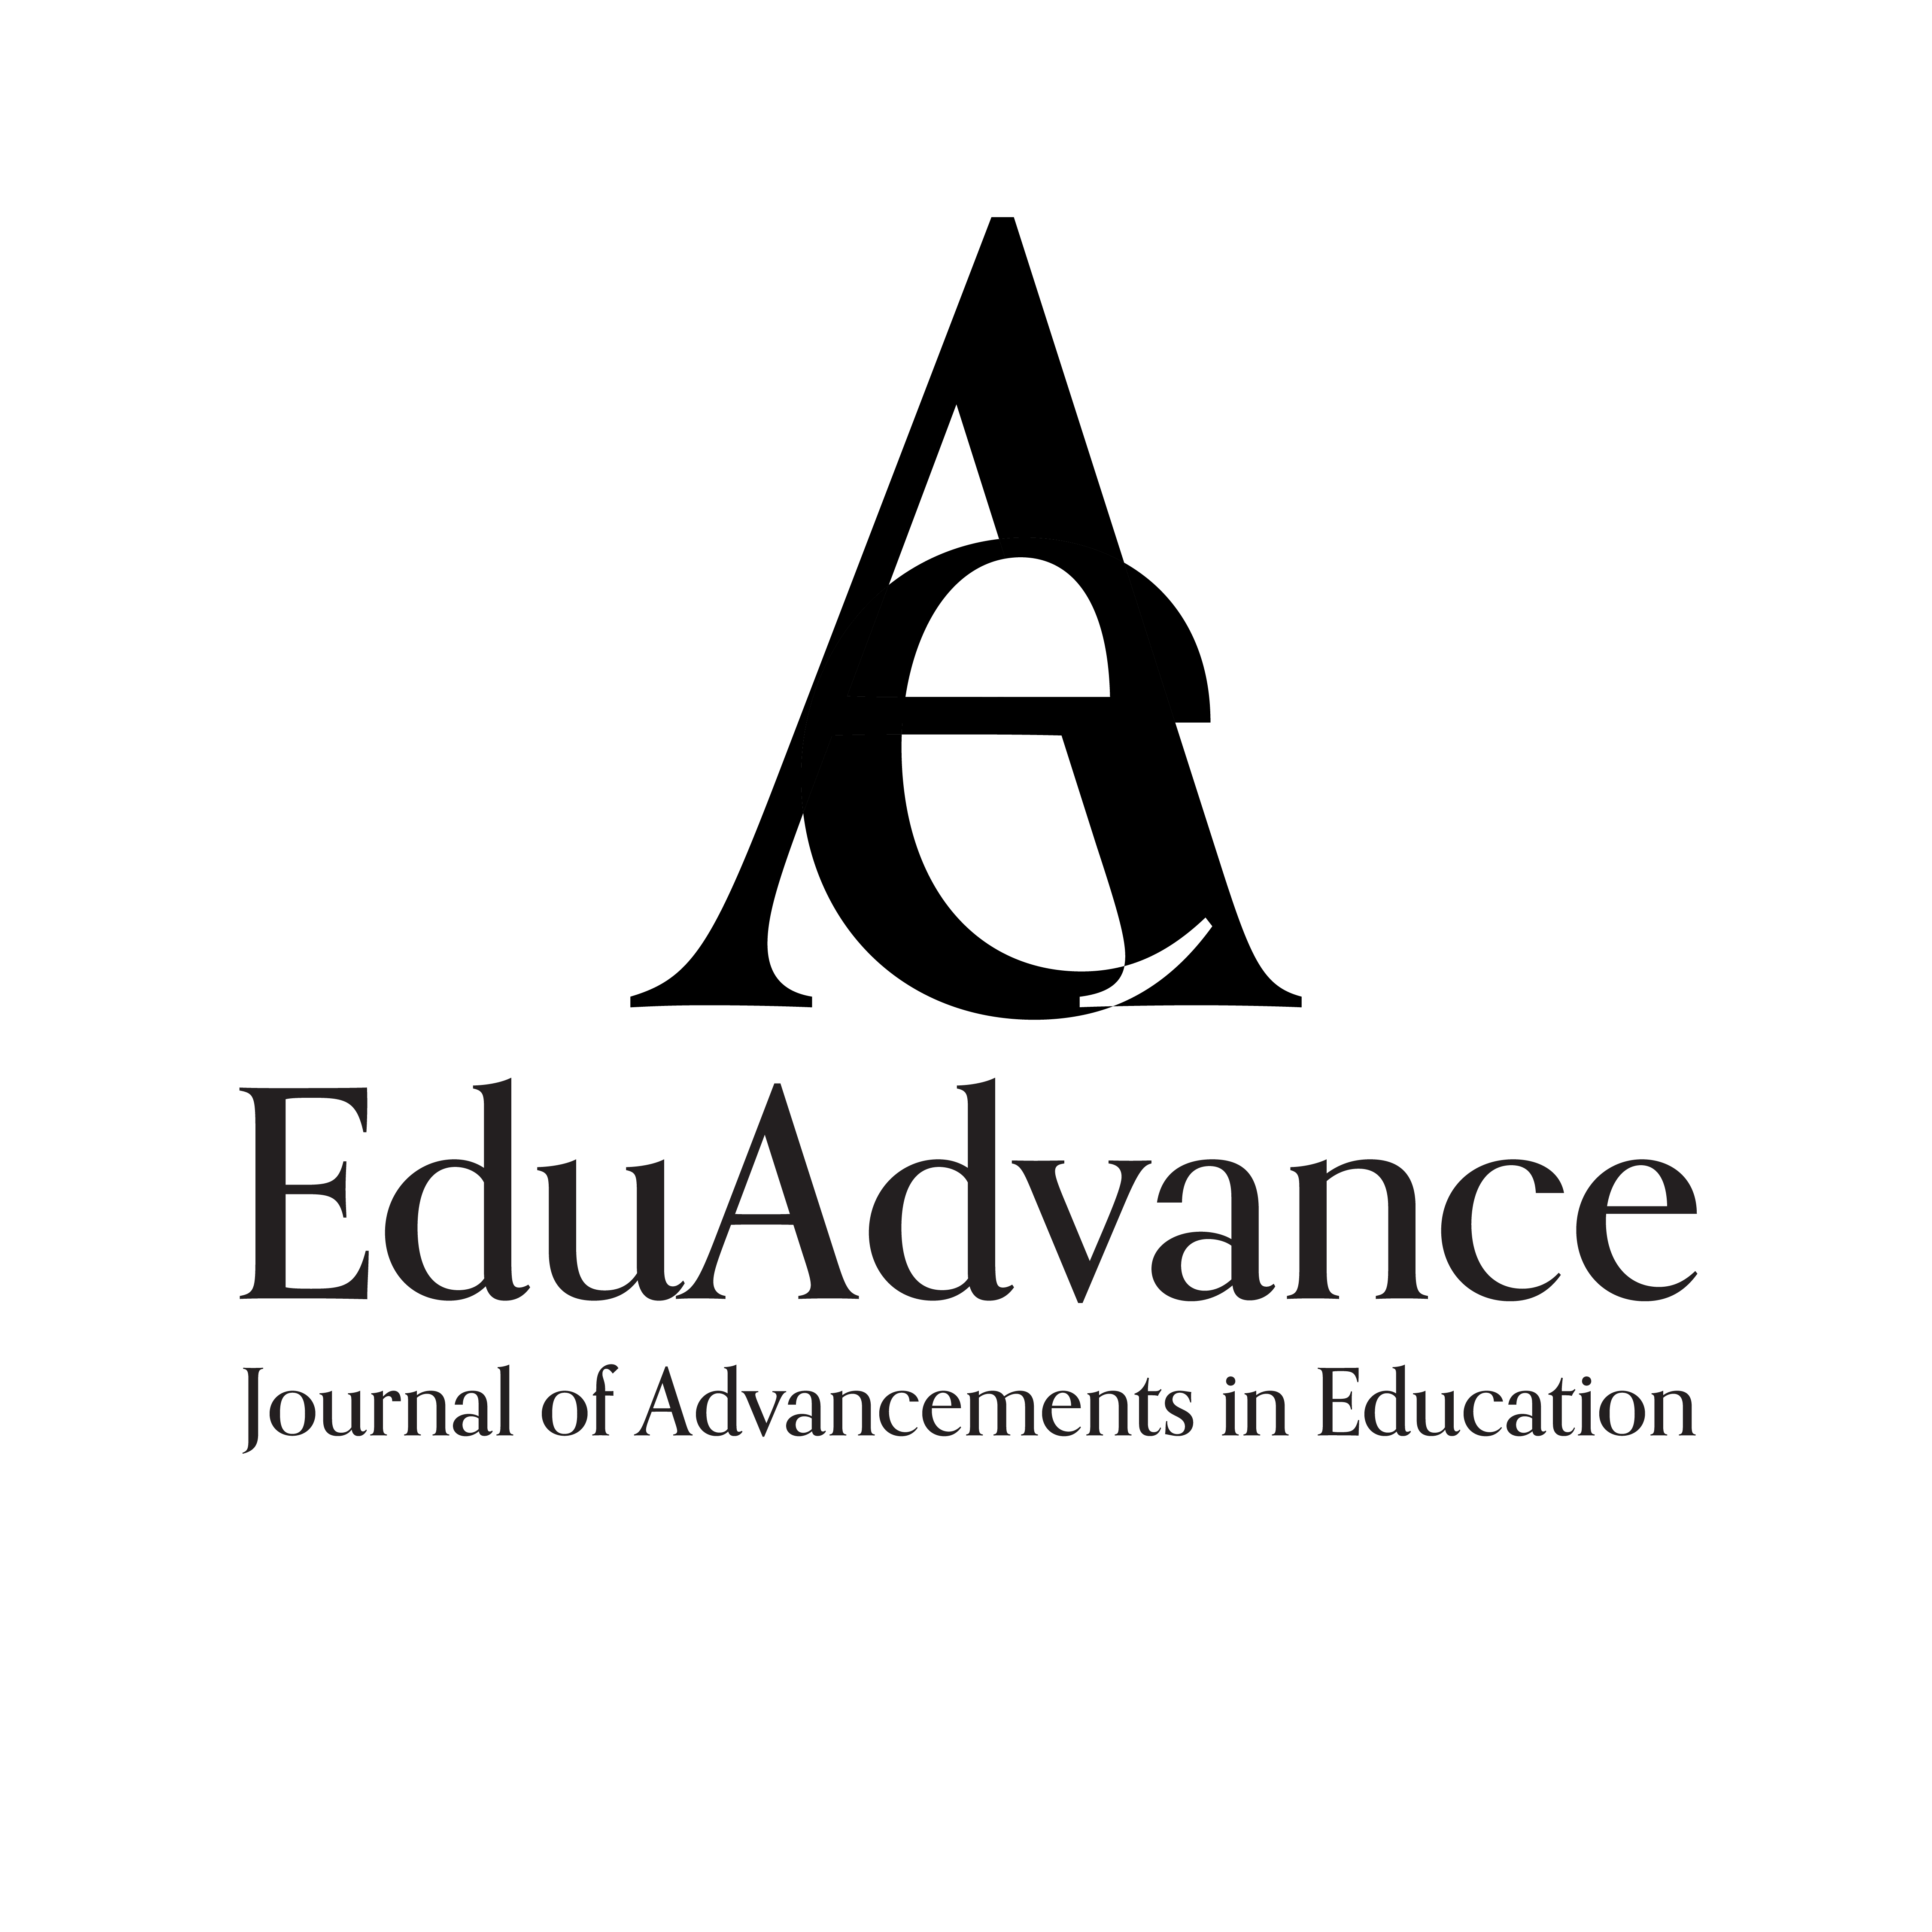 Journal of Advancements in Education